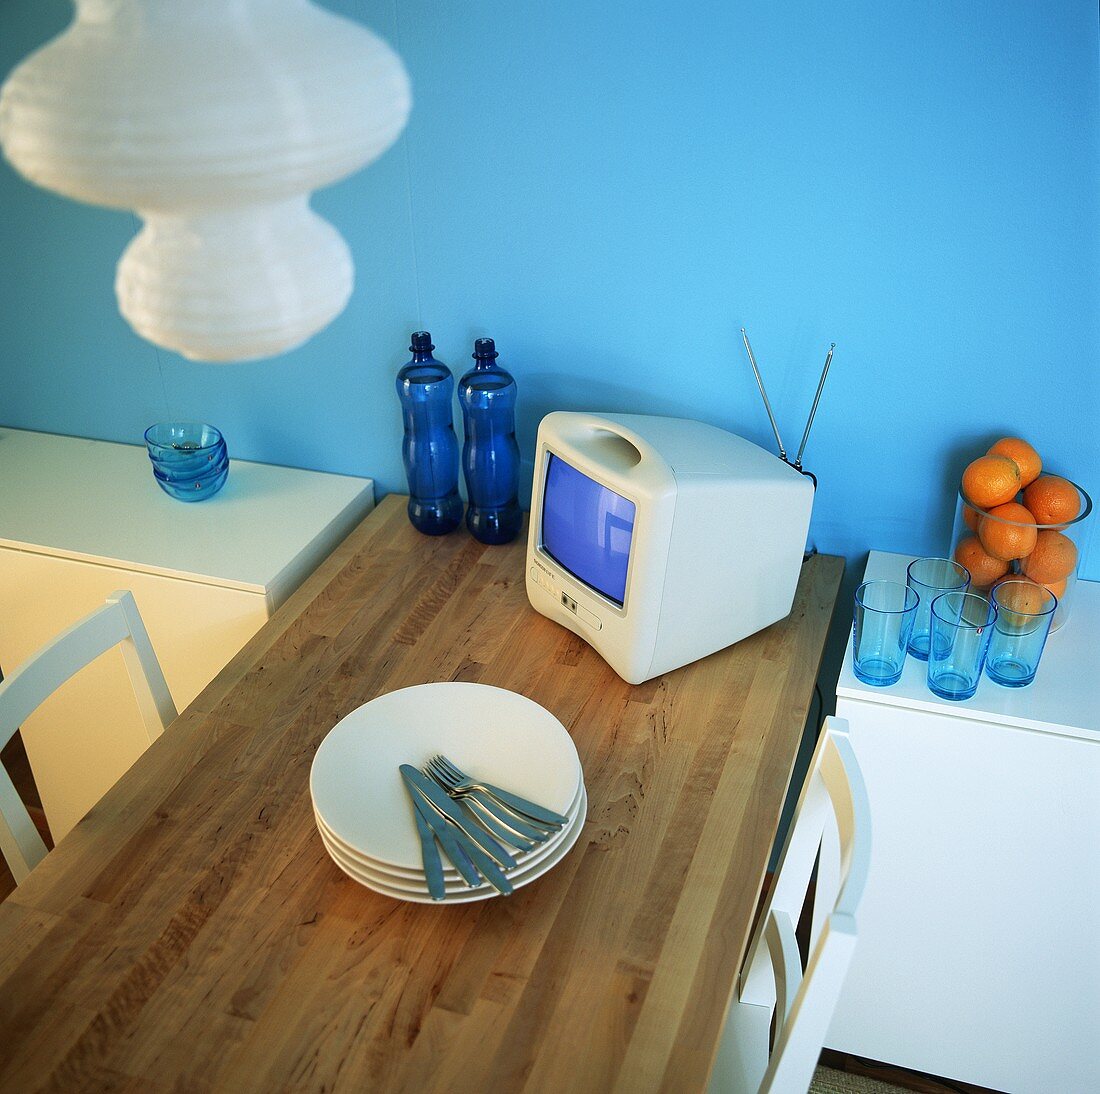 A dining table in front of a blue wall with crockery, cutlery and a television